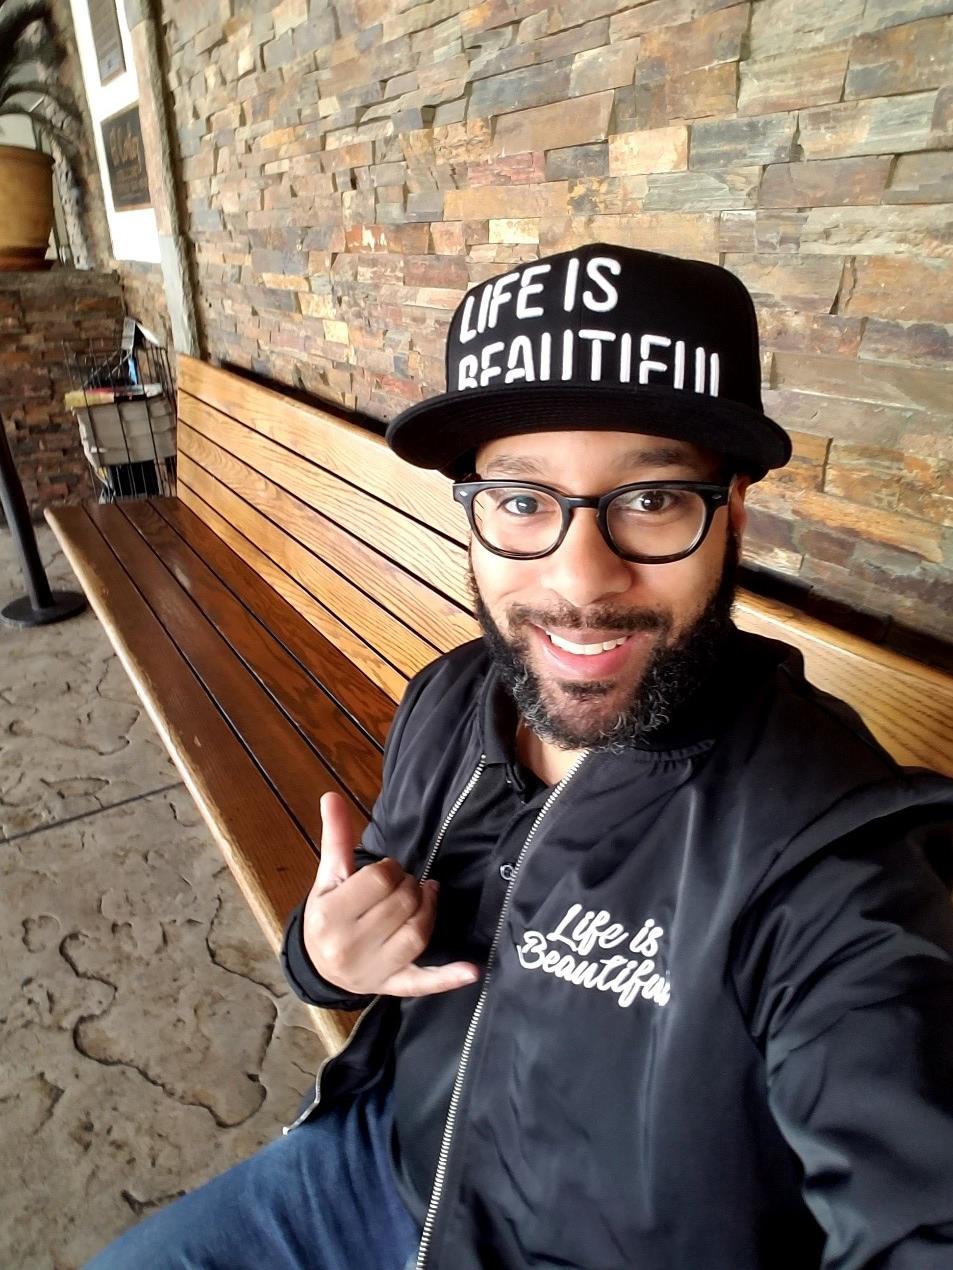 Geo is sitting on a long wooden bench in front of a brick wall. He has light brown skin, a moustache and beard. His black hat and jacket both say “Life is Beautiful.”